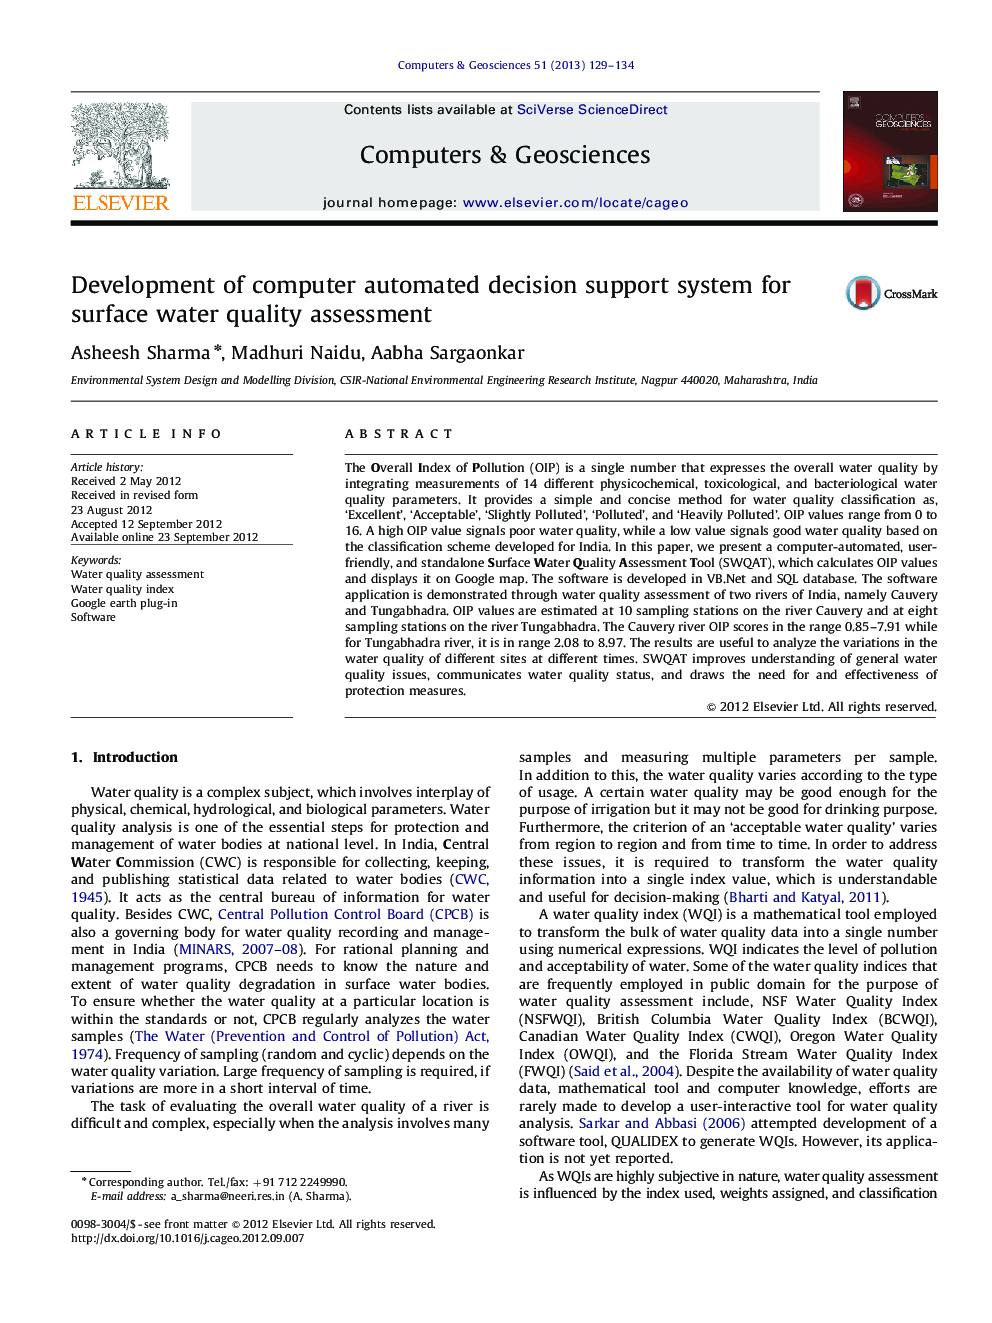 Development of computer automated decision support system for surface water quality assessment